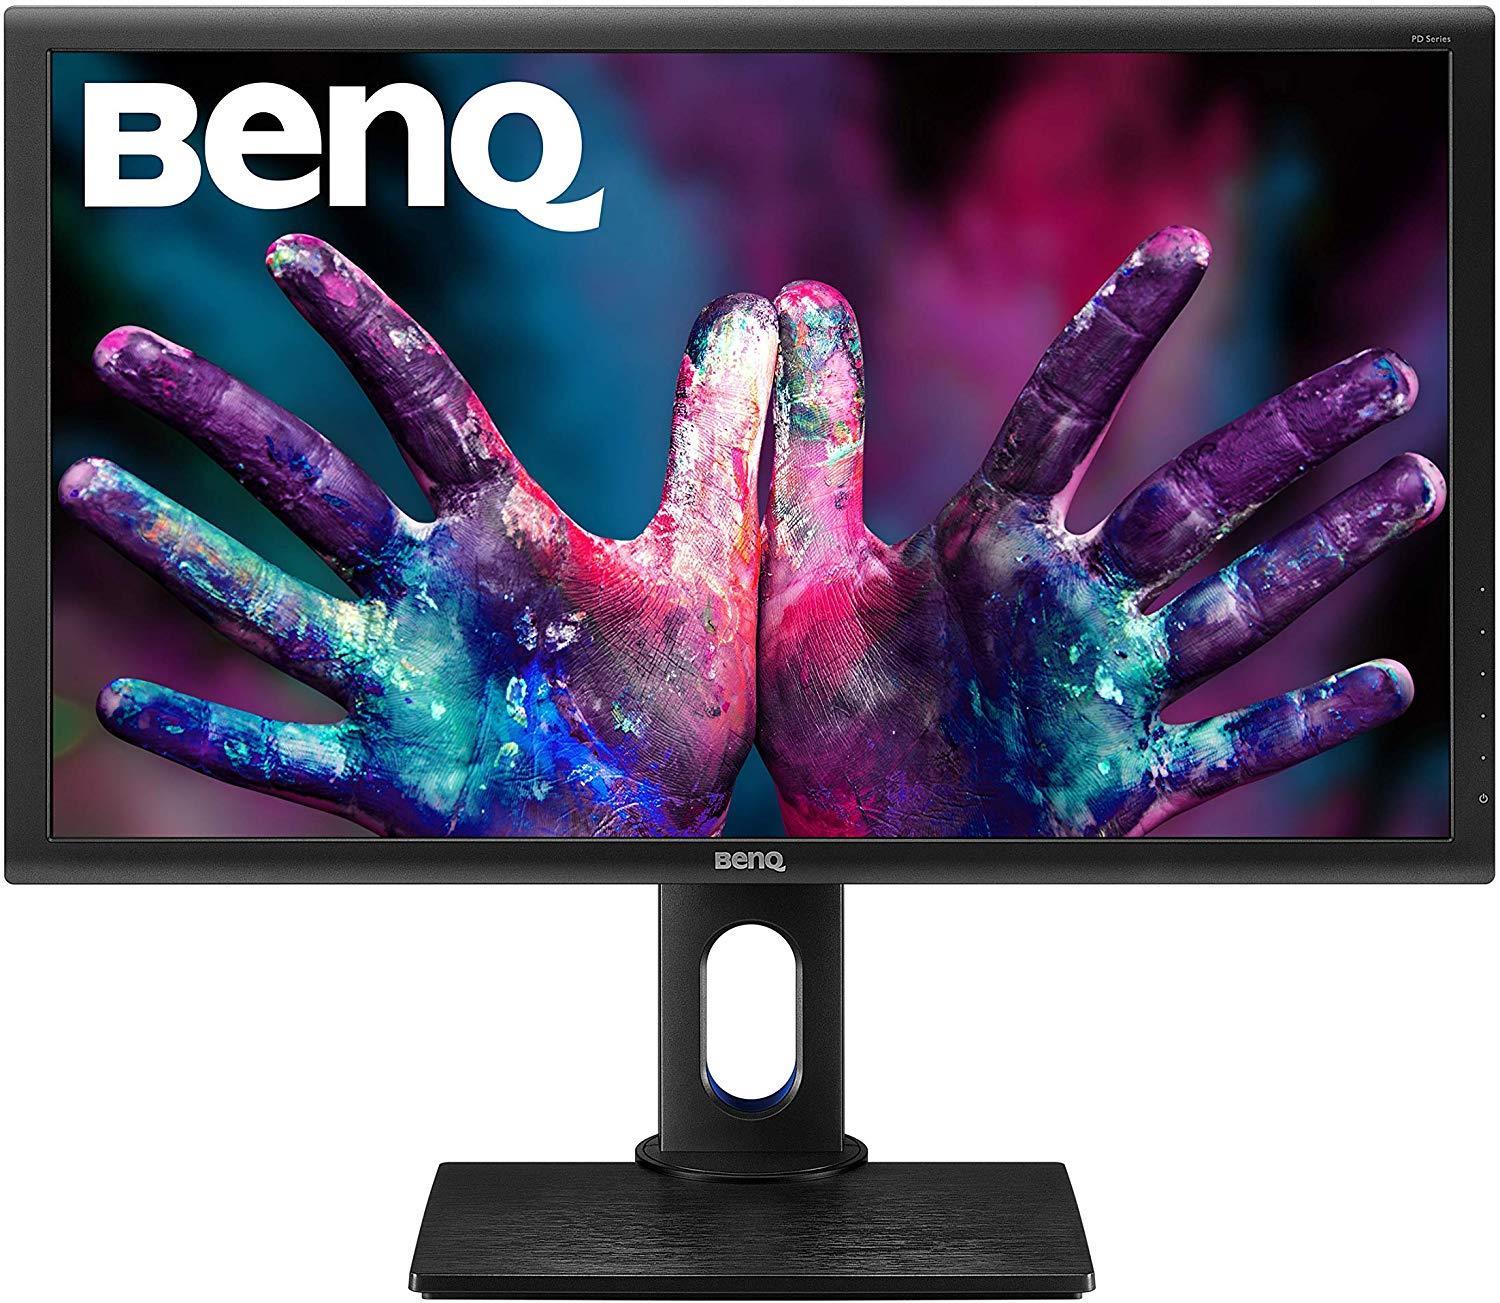 BenQ PD2700Q IPS - Monitor for Photo Editing 